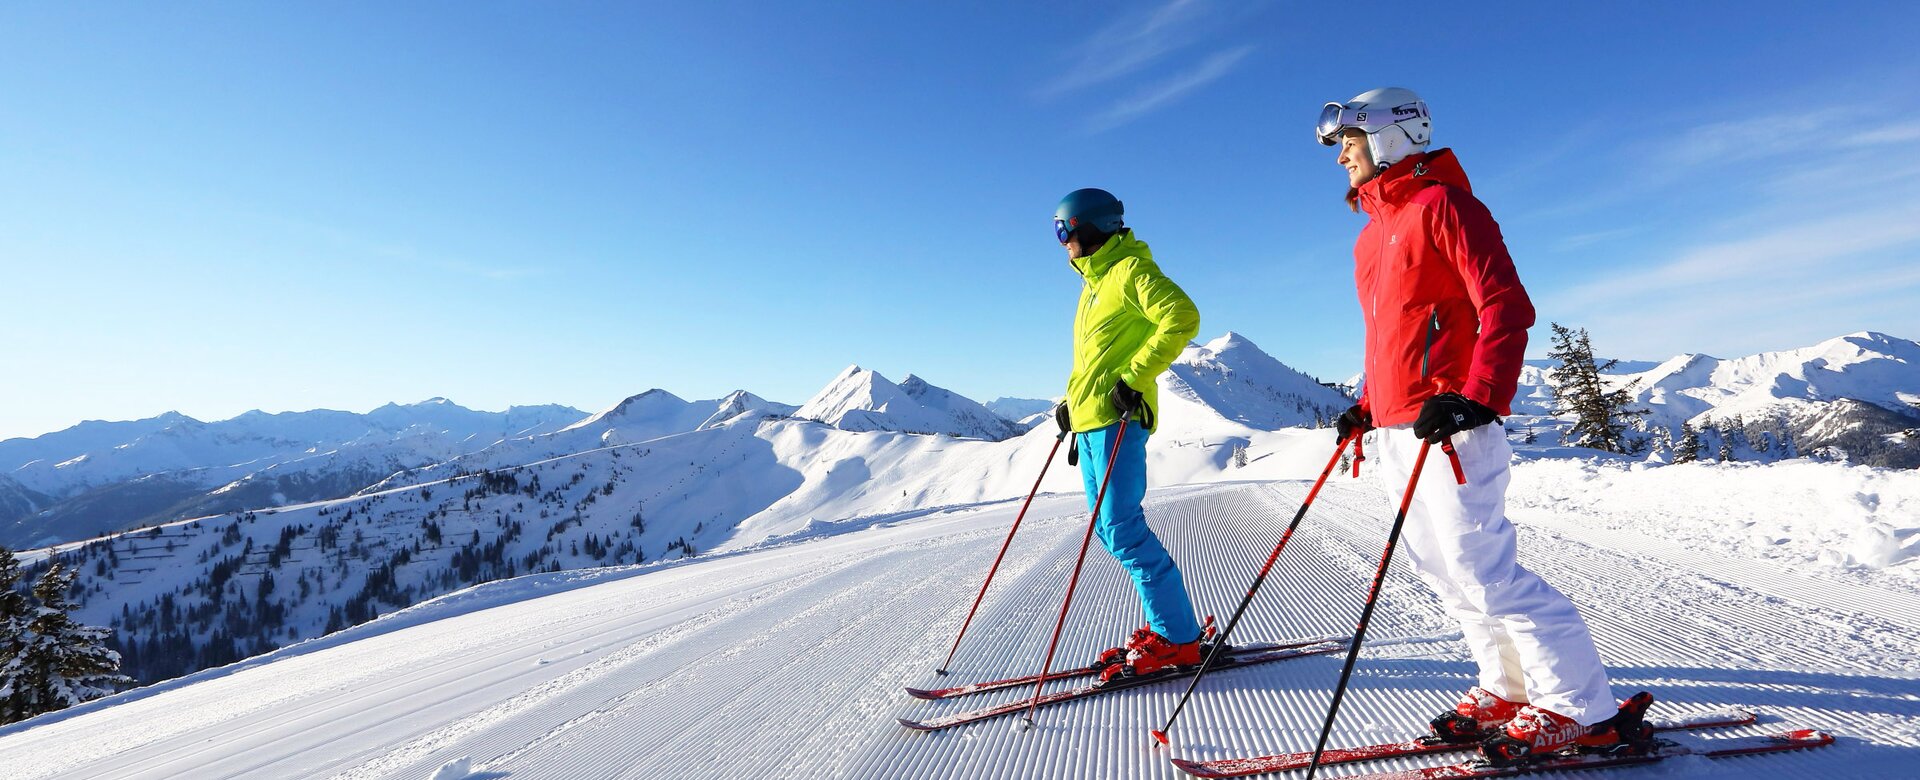 Two skiers standing on a freshly groomed slope looking down, snow-capped mountains and a bright blue sky with sun in the background | © Tourismusverband Großarltal